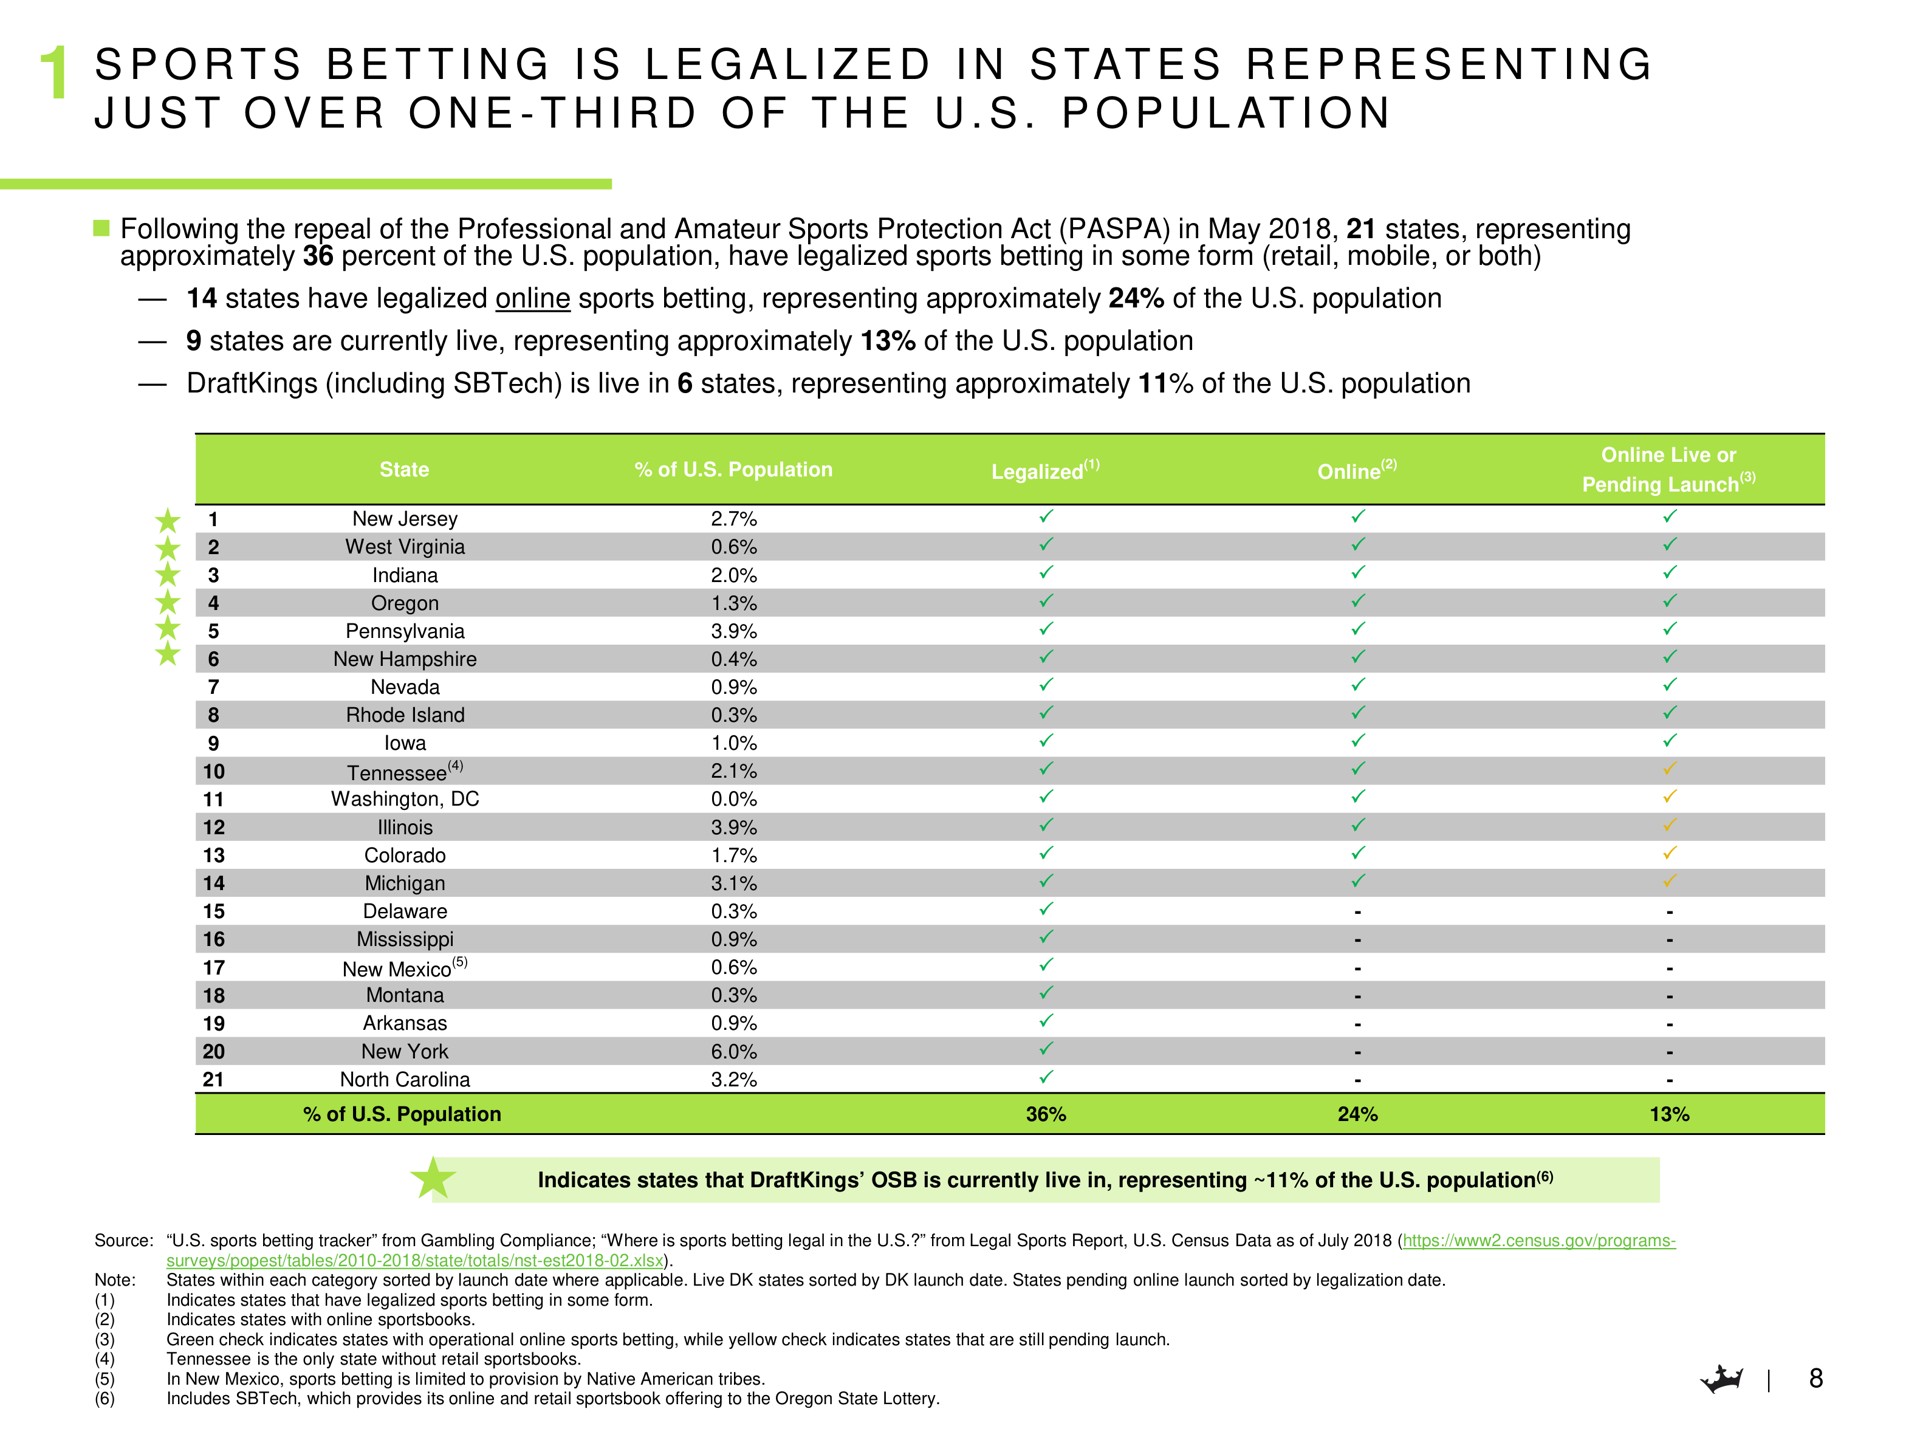 i i a i i tat i i at i sports betting is legalized in states representing just over one third of the population | DraftKings